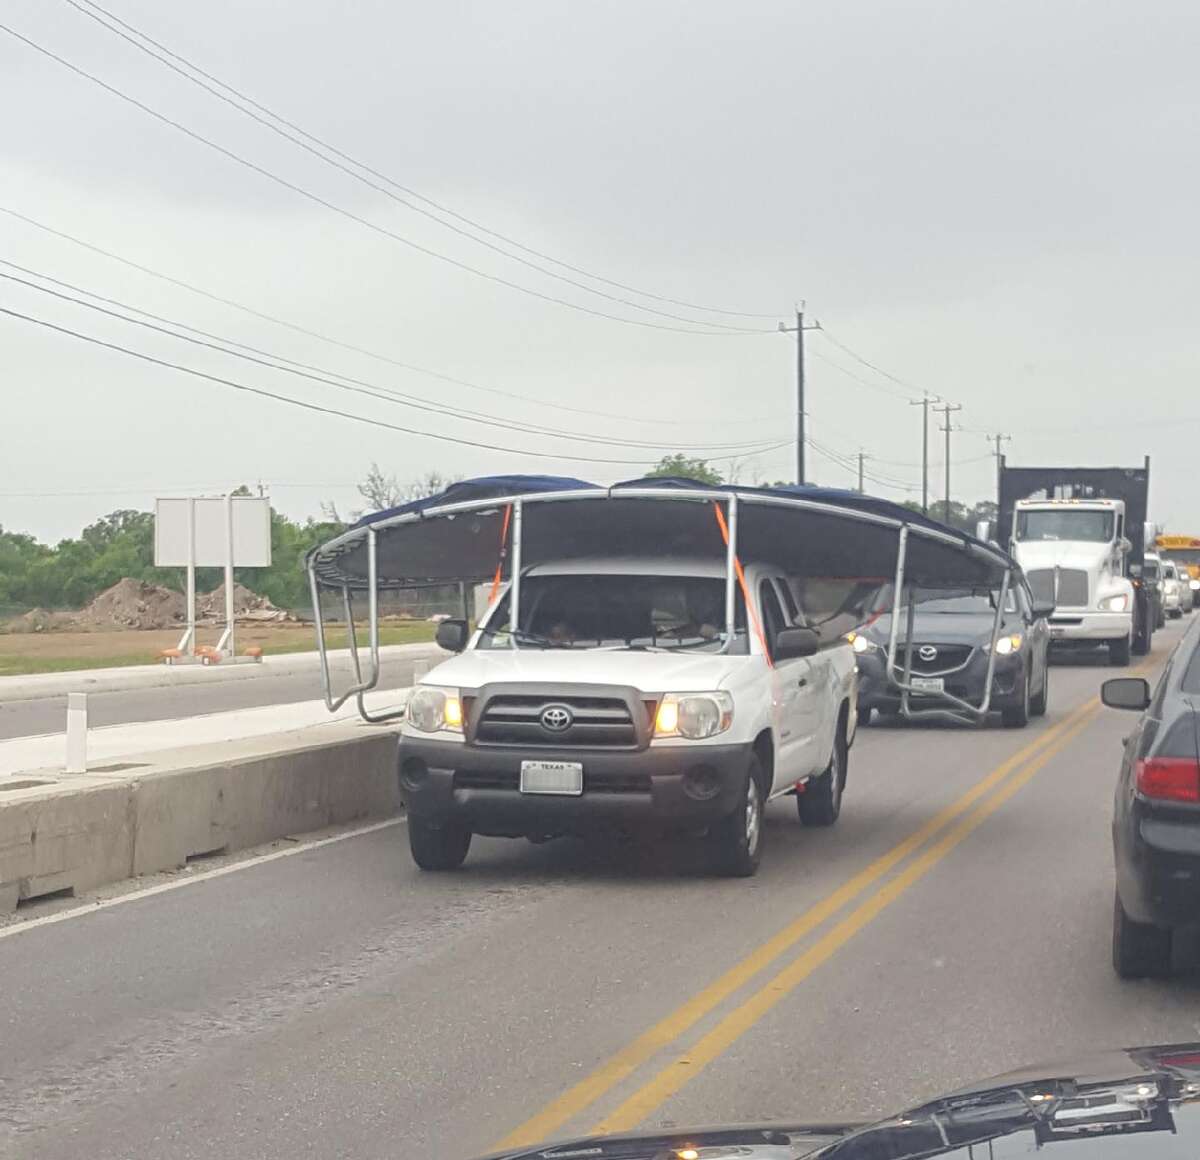 The odd sight of a trampoline strapped and hanging well over a Toyota pickup truck is making the rounds on the San Antonio subreddit. The photo shows the structure scraping the edges of the lane.